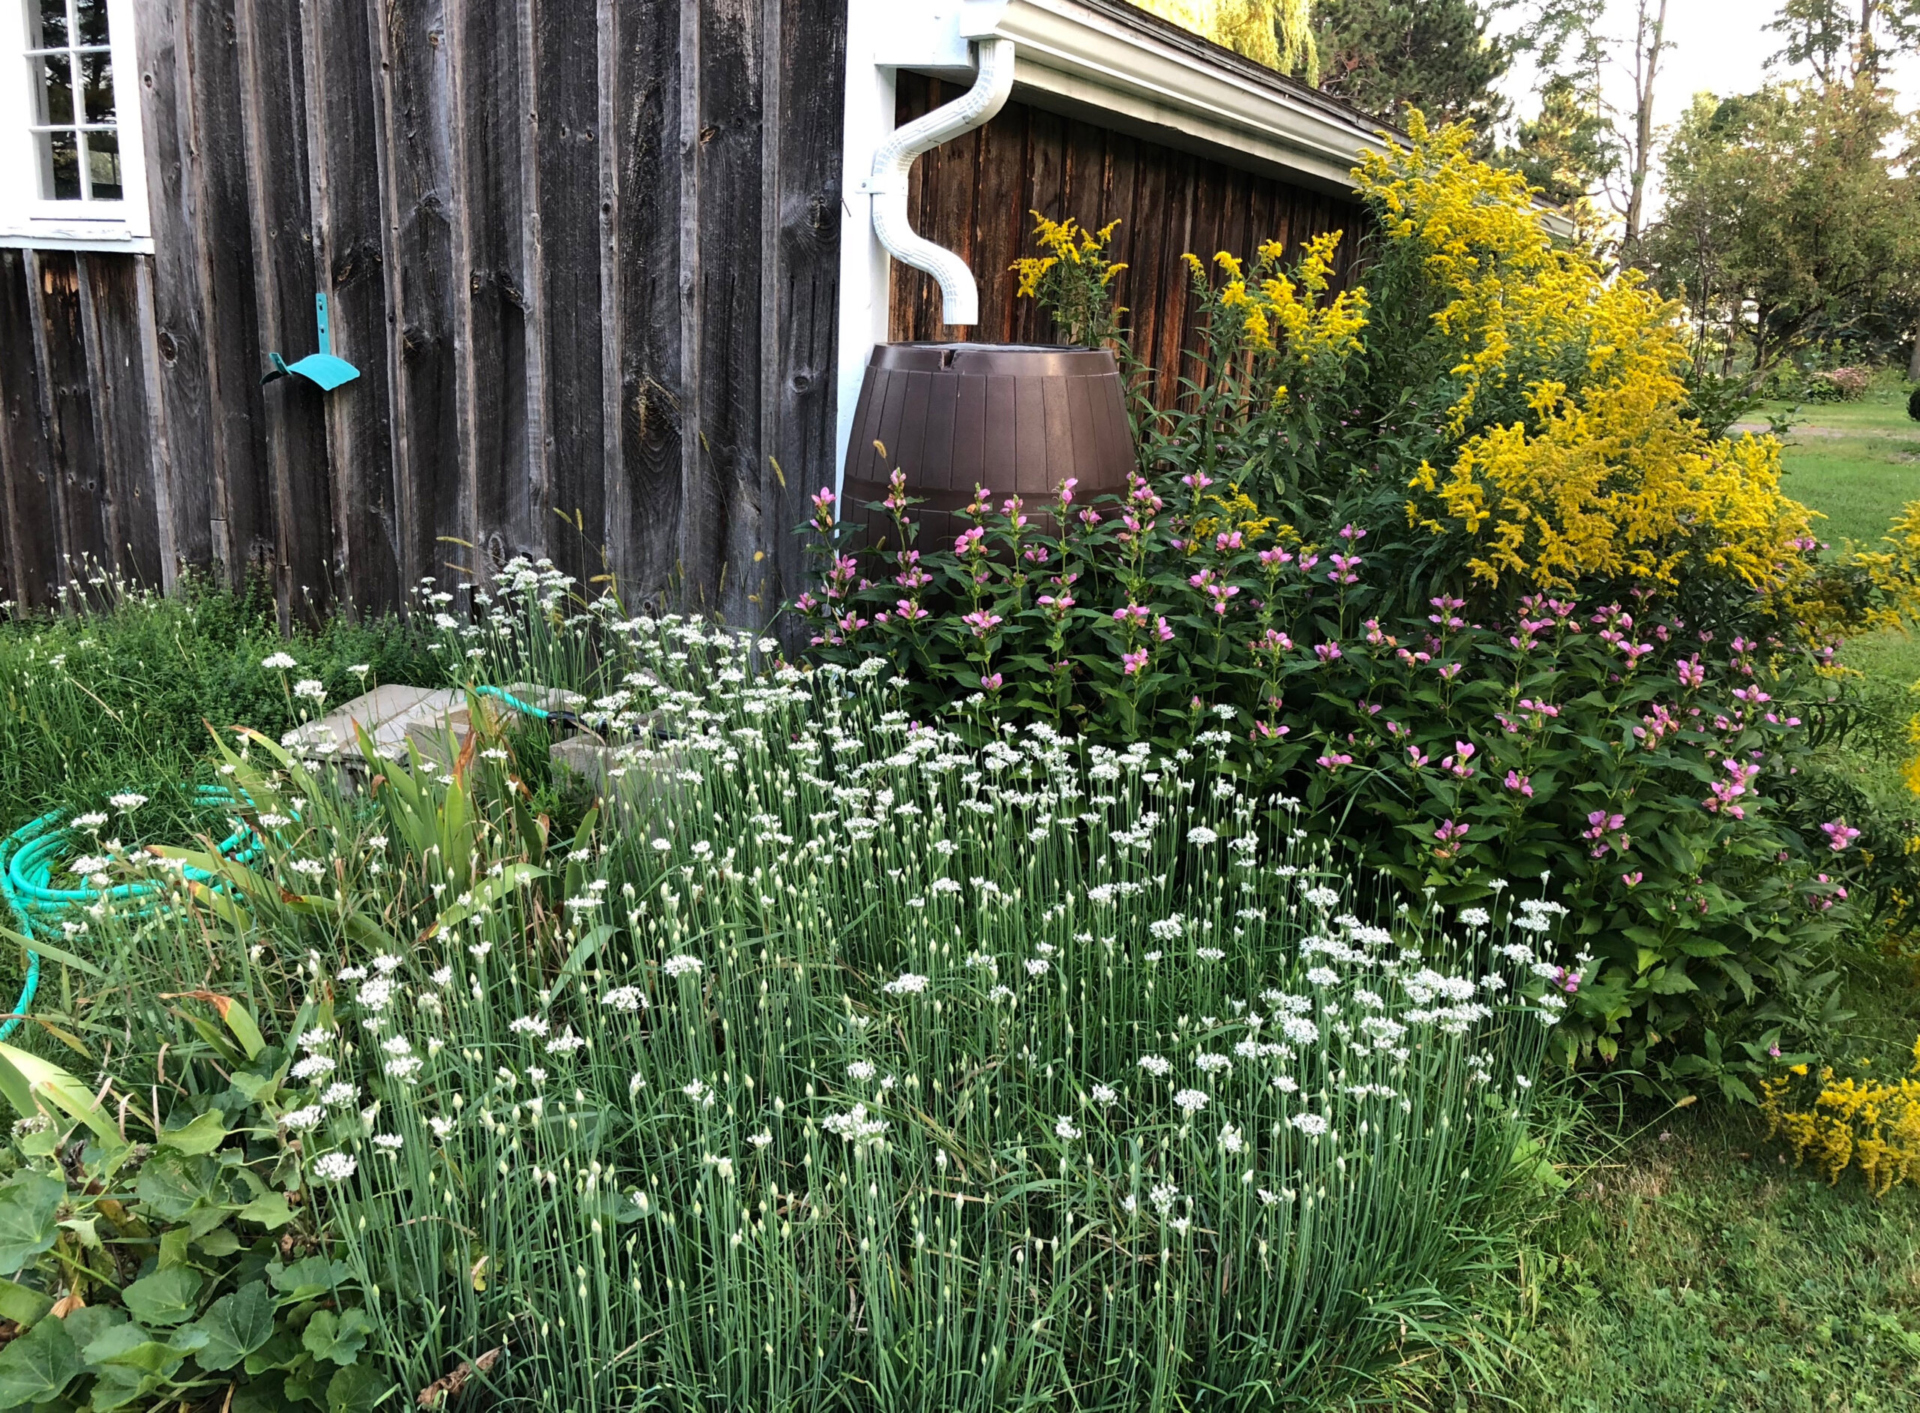 A rain barrel sits under the gutters of a shed, surrounded by flowers in a rain garden.